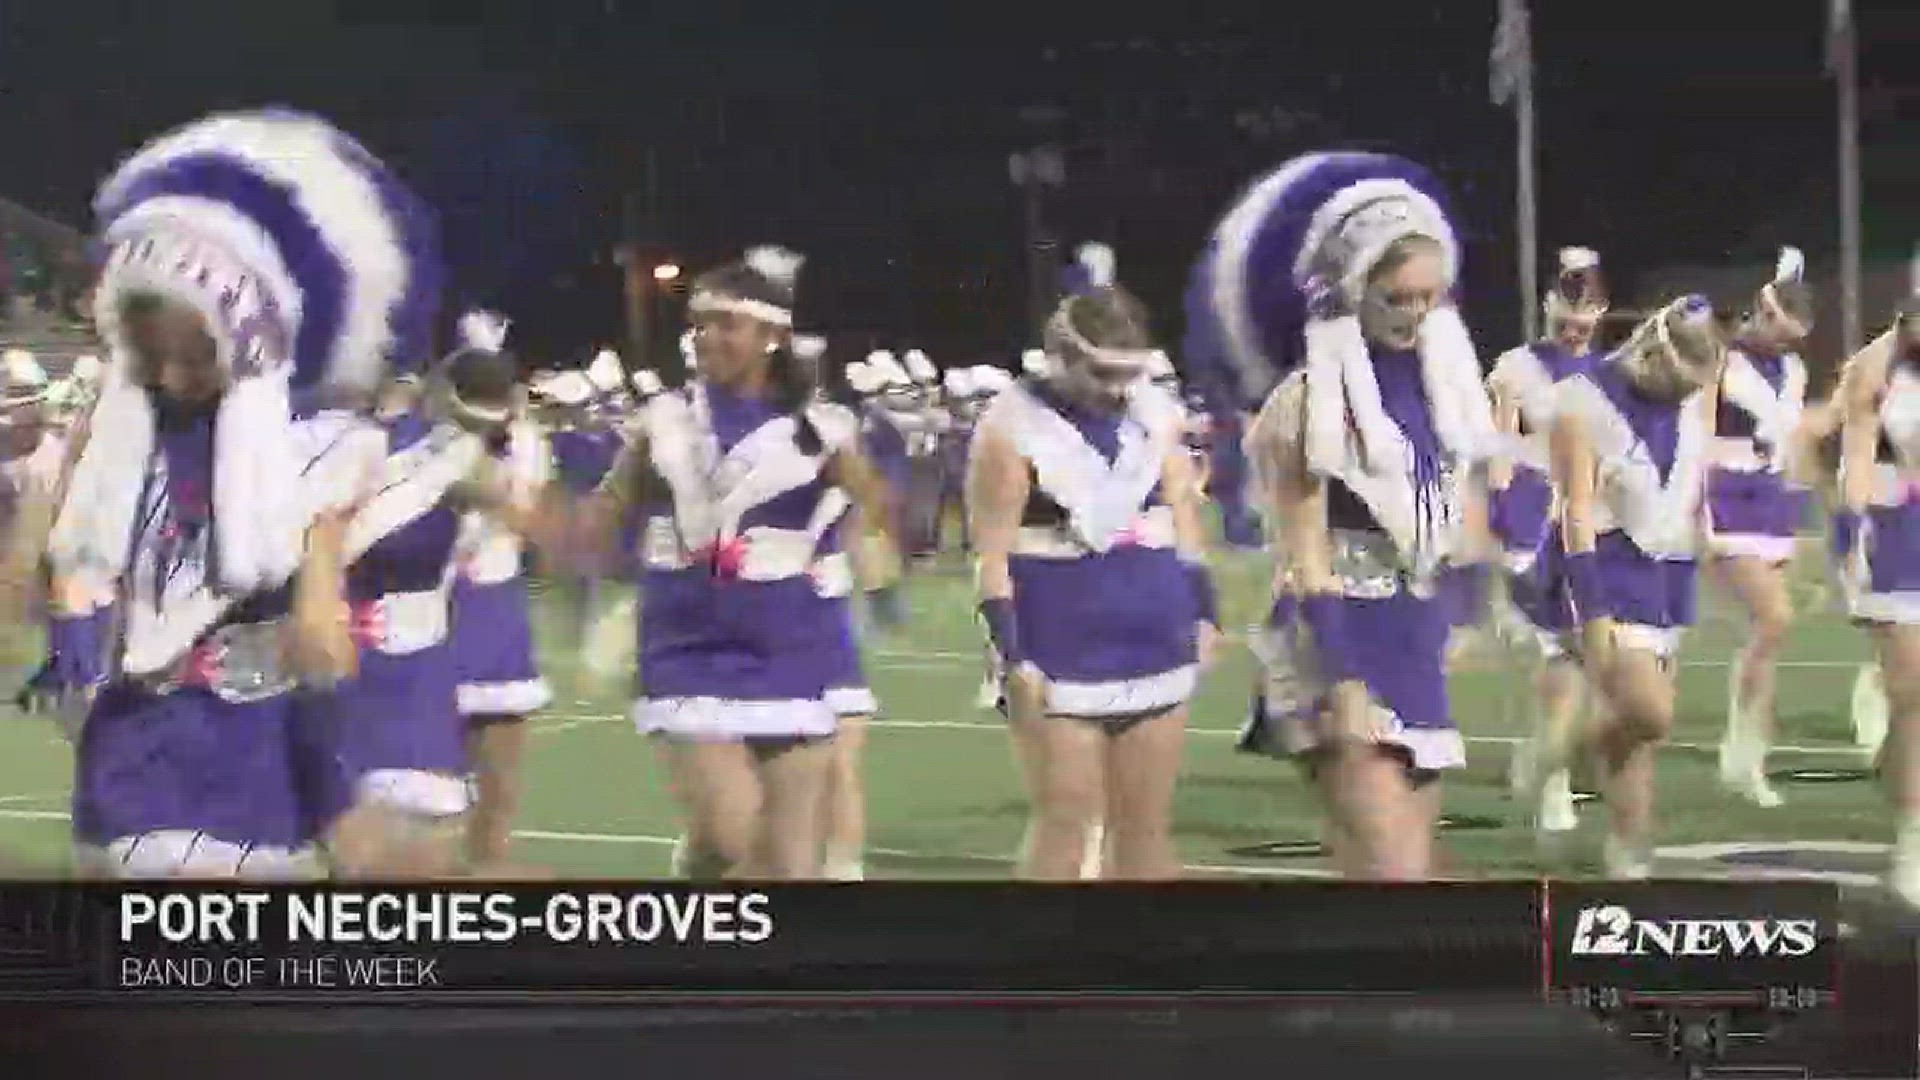 Week 7 Band of the Week is the Port Neches-Groves Indian Marching Band